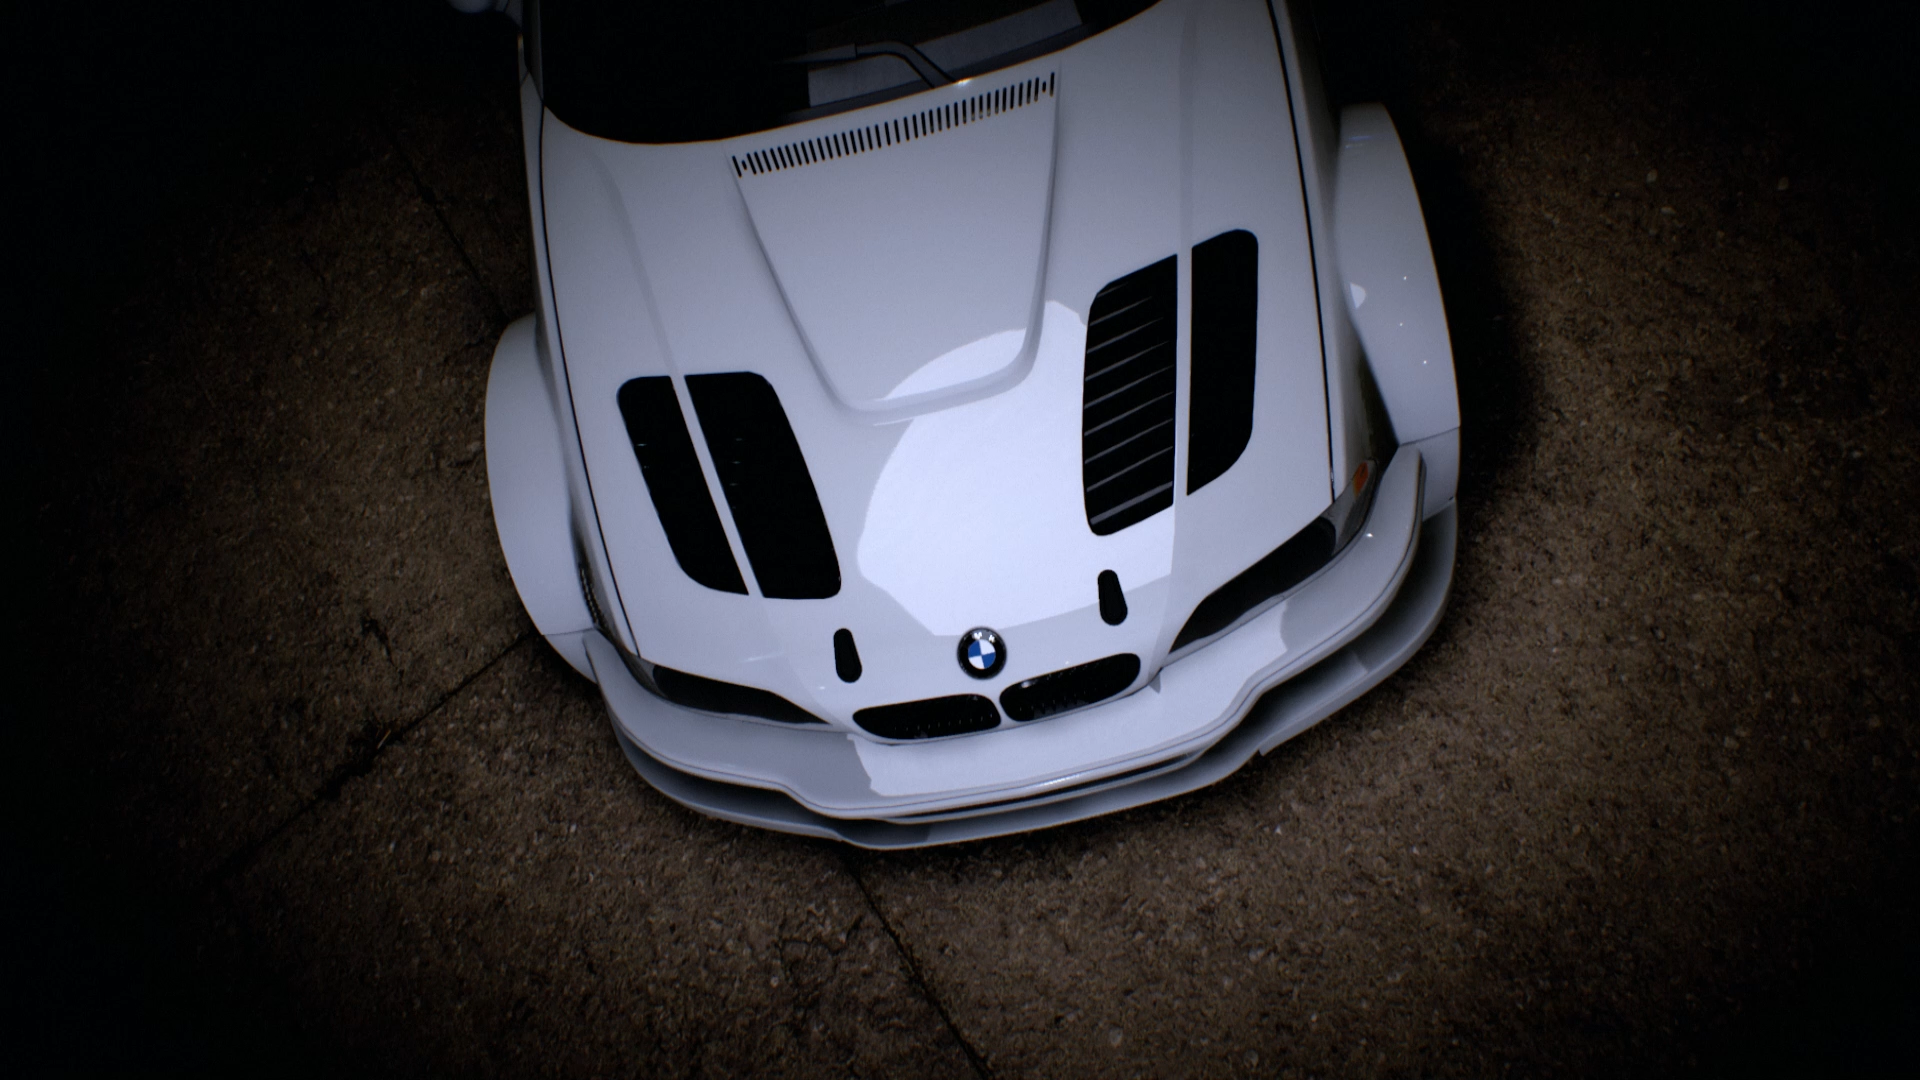 General 1920x1080 white Need for Speed BMW BMW E46 BMW 3 Series top view car bodykit video games